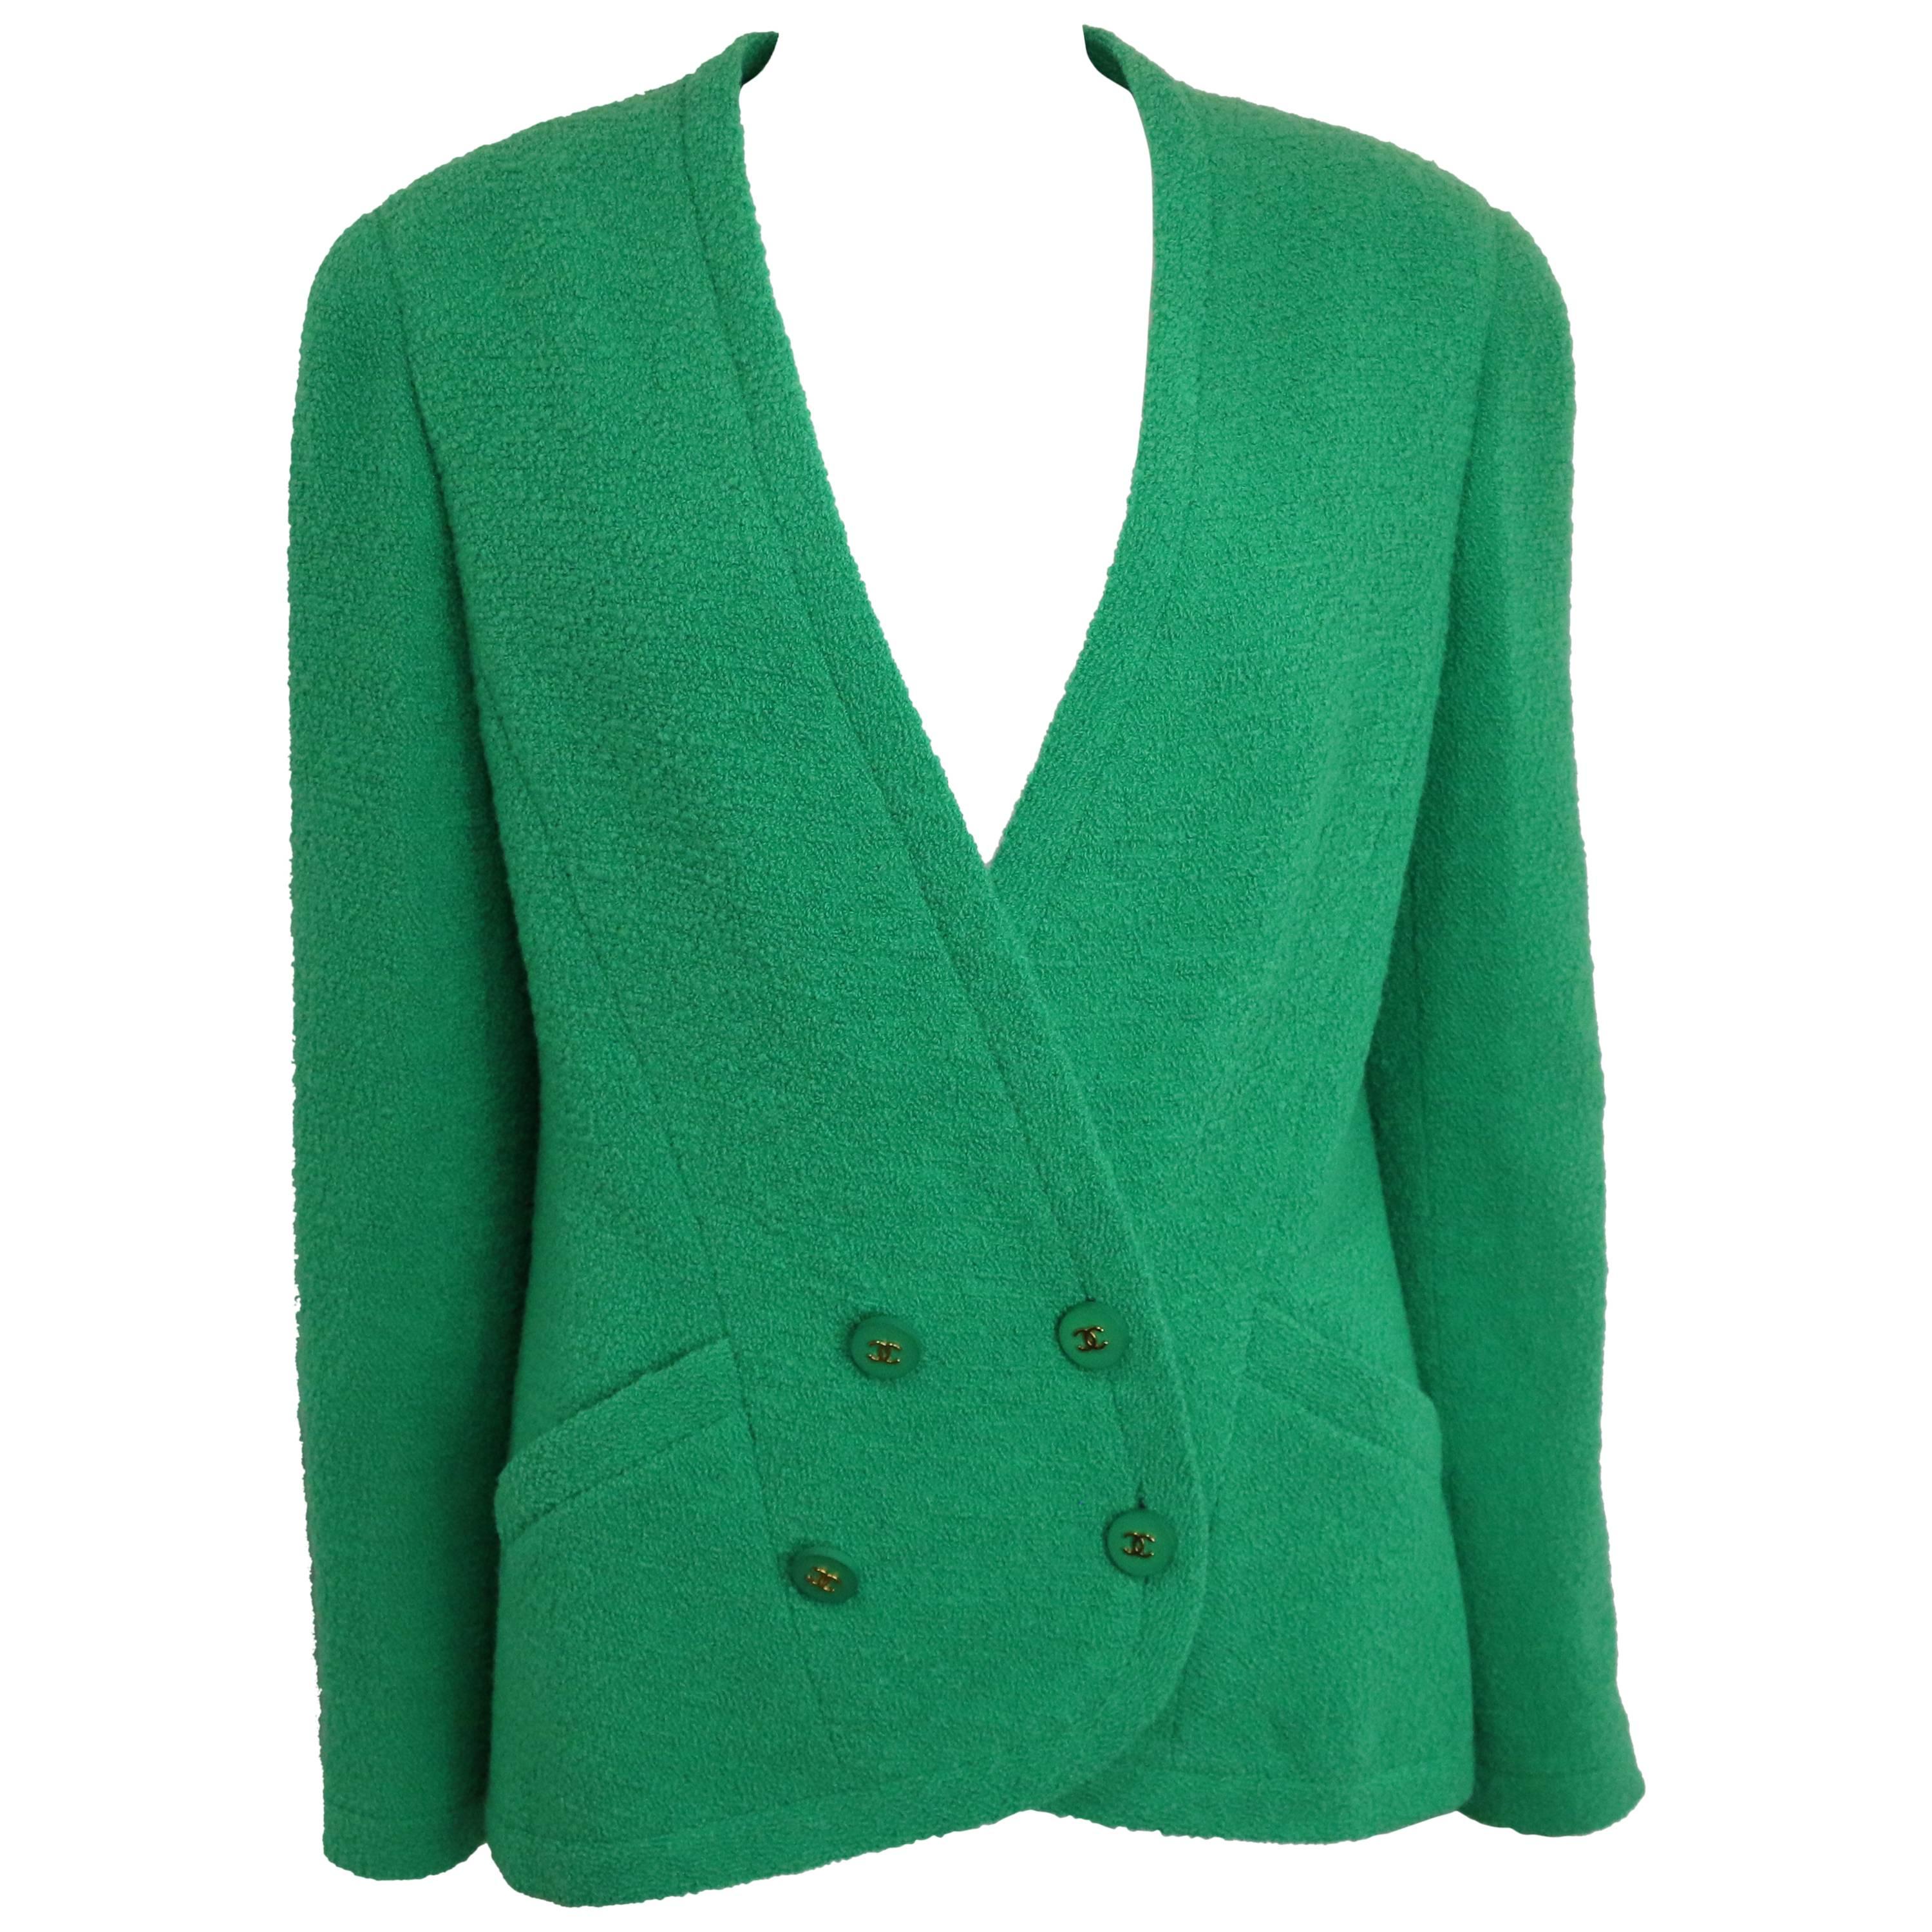 94 Chanel Green Boucle Wool Collarless Double Breasted Jacket 